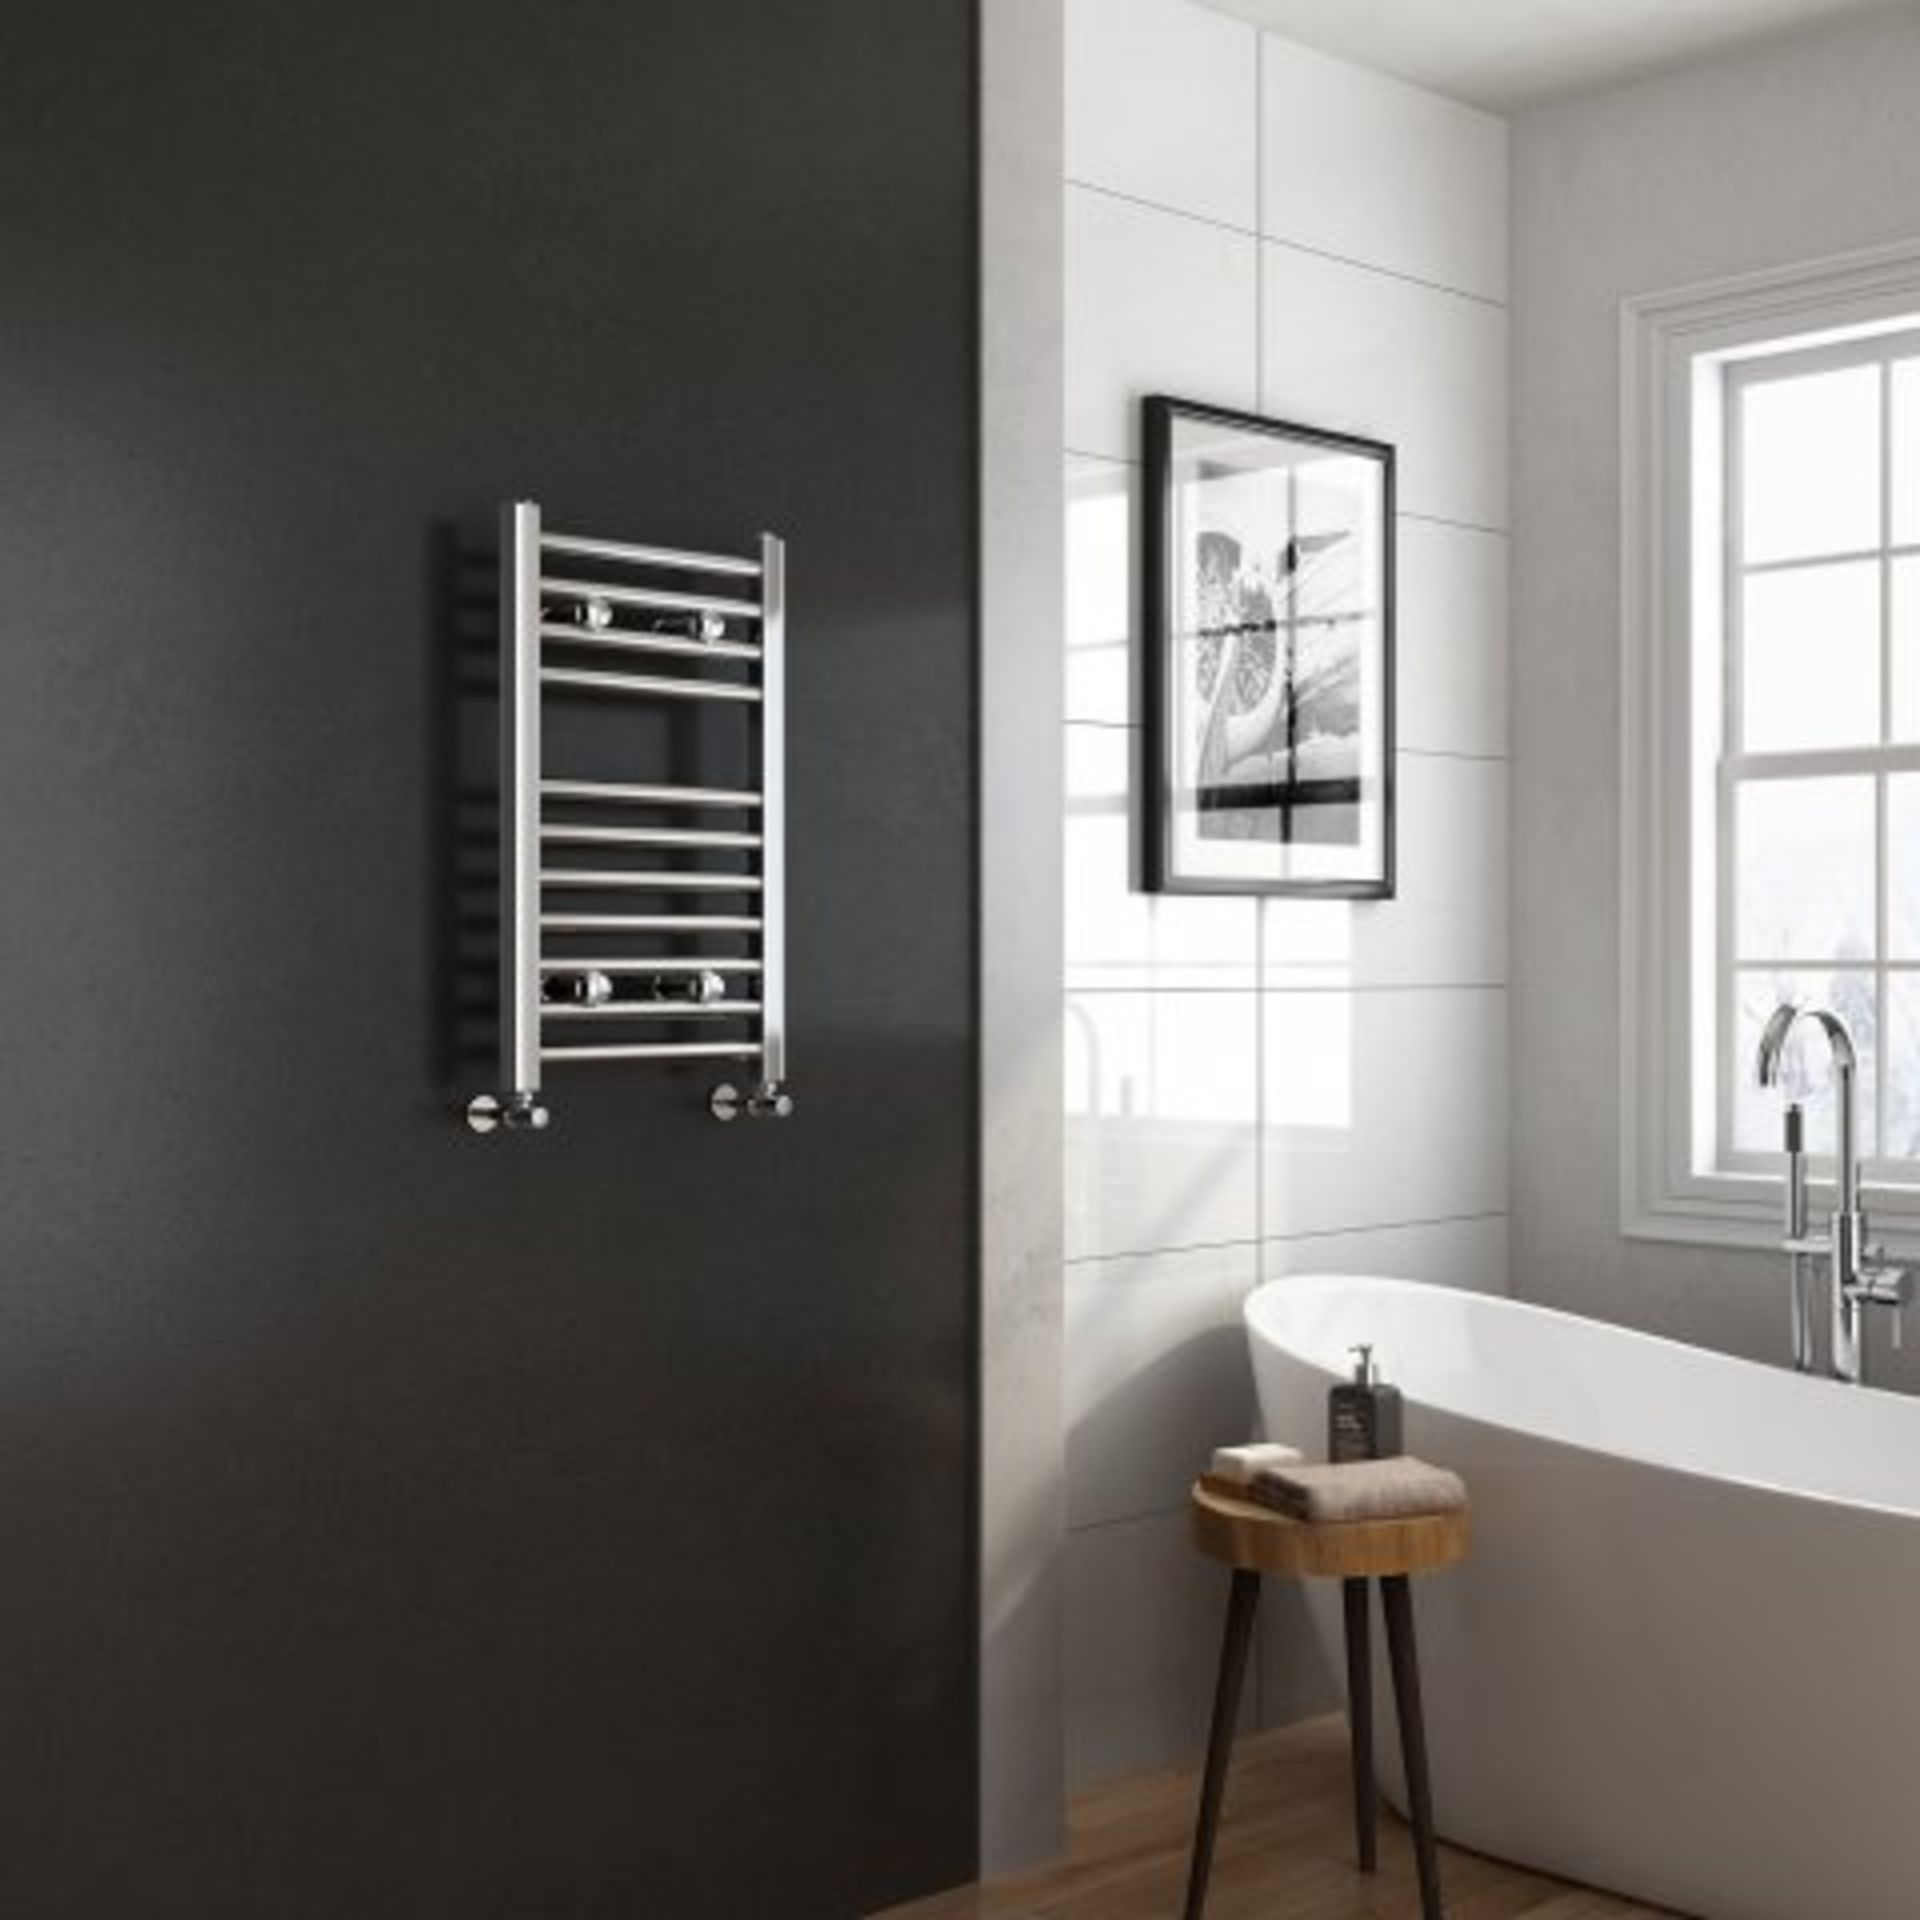 (I81) 650x400mm - 25mm Tubes - Chrome Heated Straight Rail Ladder Towel Radiator Benefit from the - Image 2 of 3